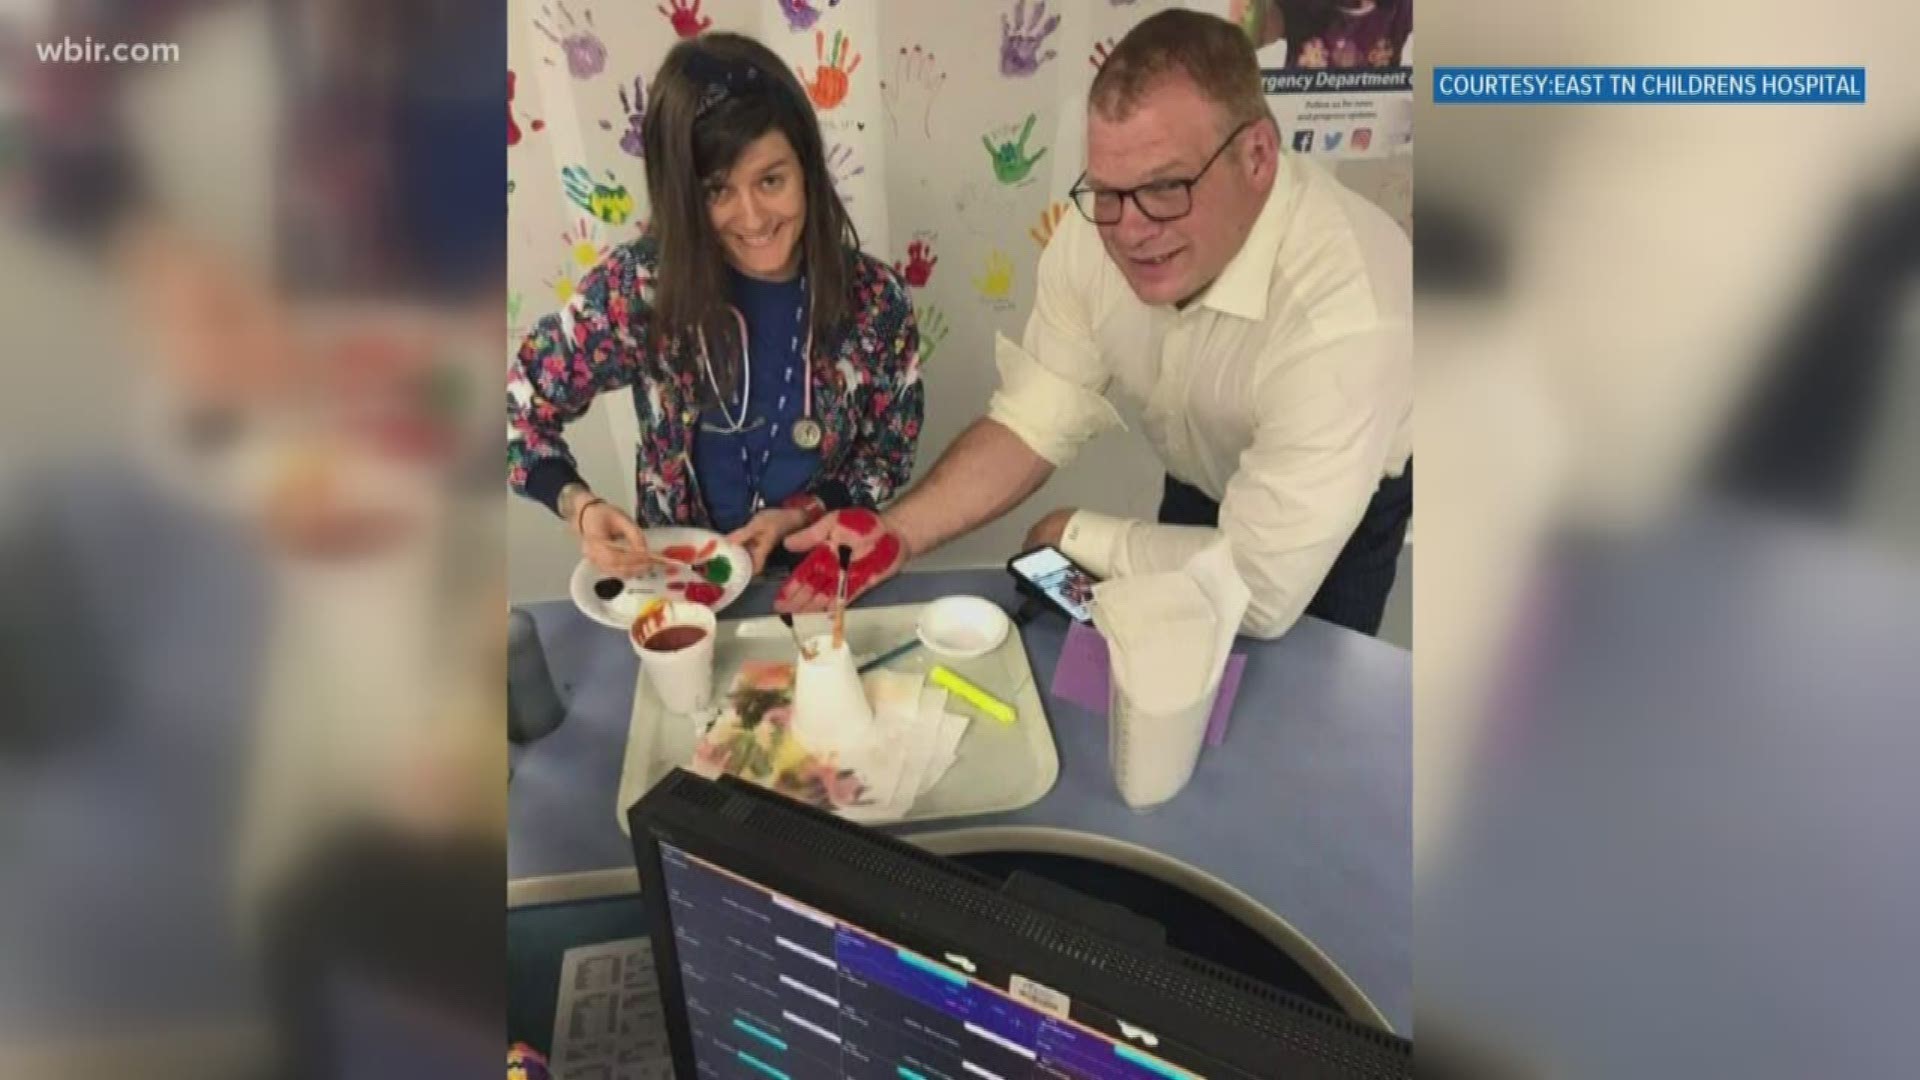 Knox County mayor Glenn Jacobs pent some time decorating the construction walls in East Tennessee Children's Hospital.